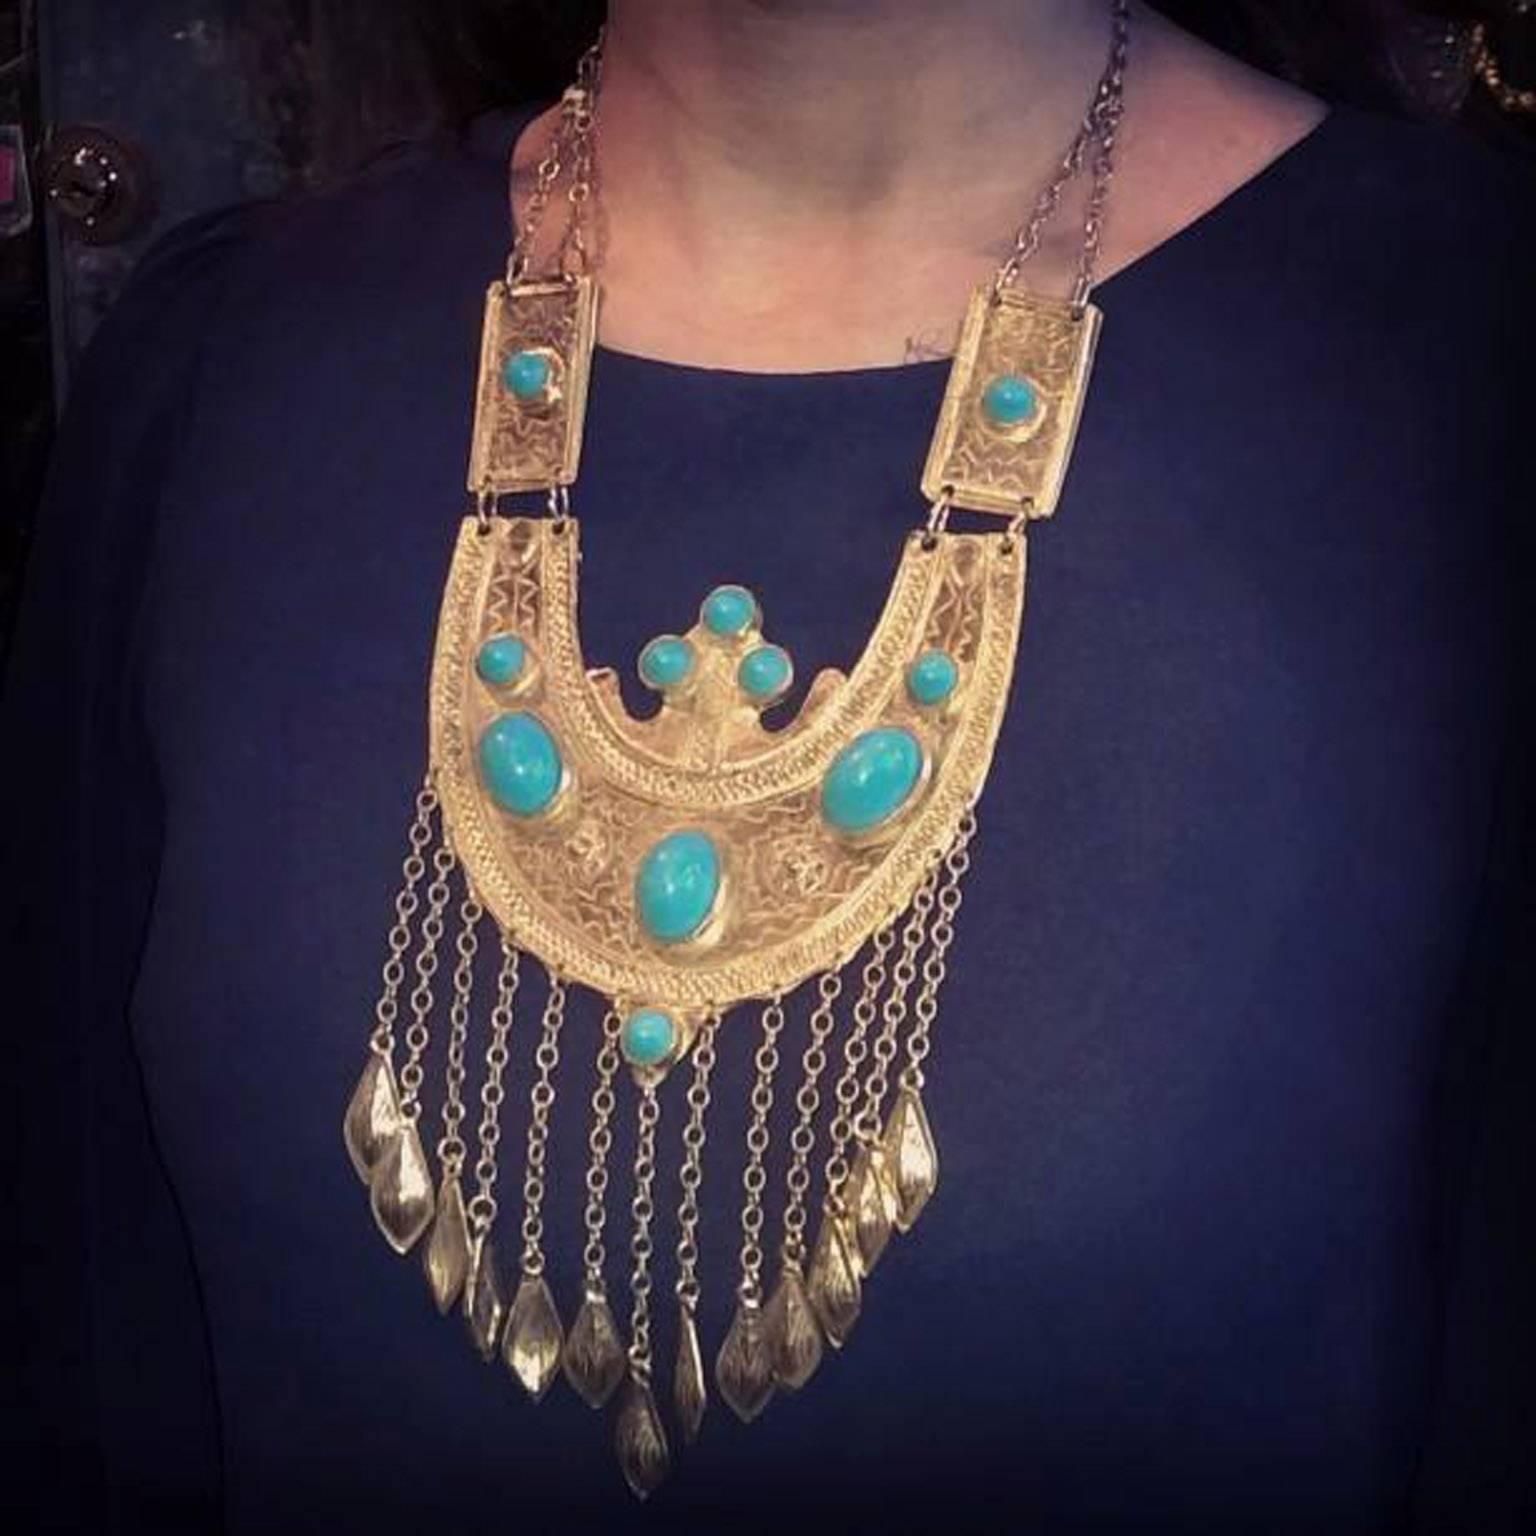 An amazing vintage statement Etruscan style necklace by Alexis Kirk, gold plated and featuring turquoise glass cabochons, with a fringe of metal beaded chain.

This piece reflects how Alexis Kirk was inspired by symbolism of different cultures and